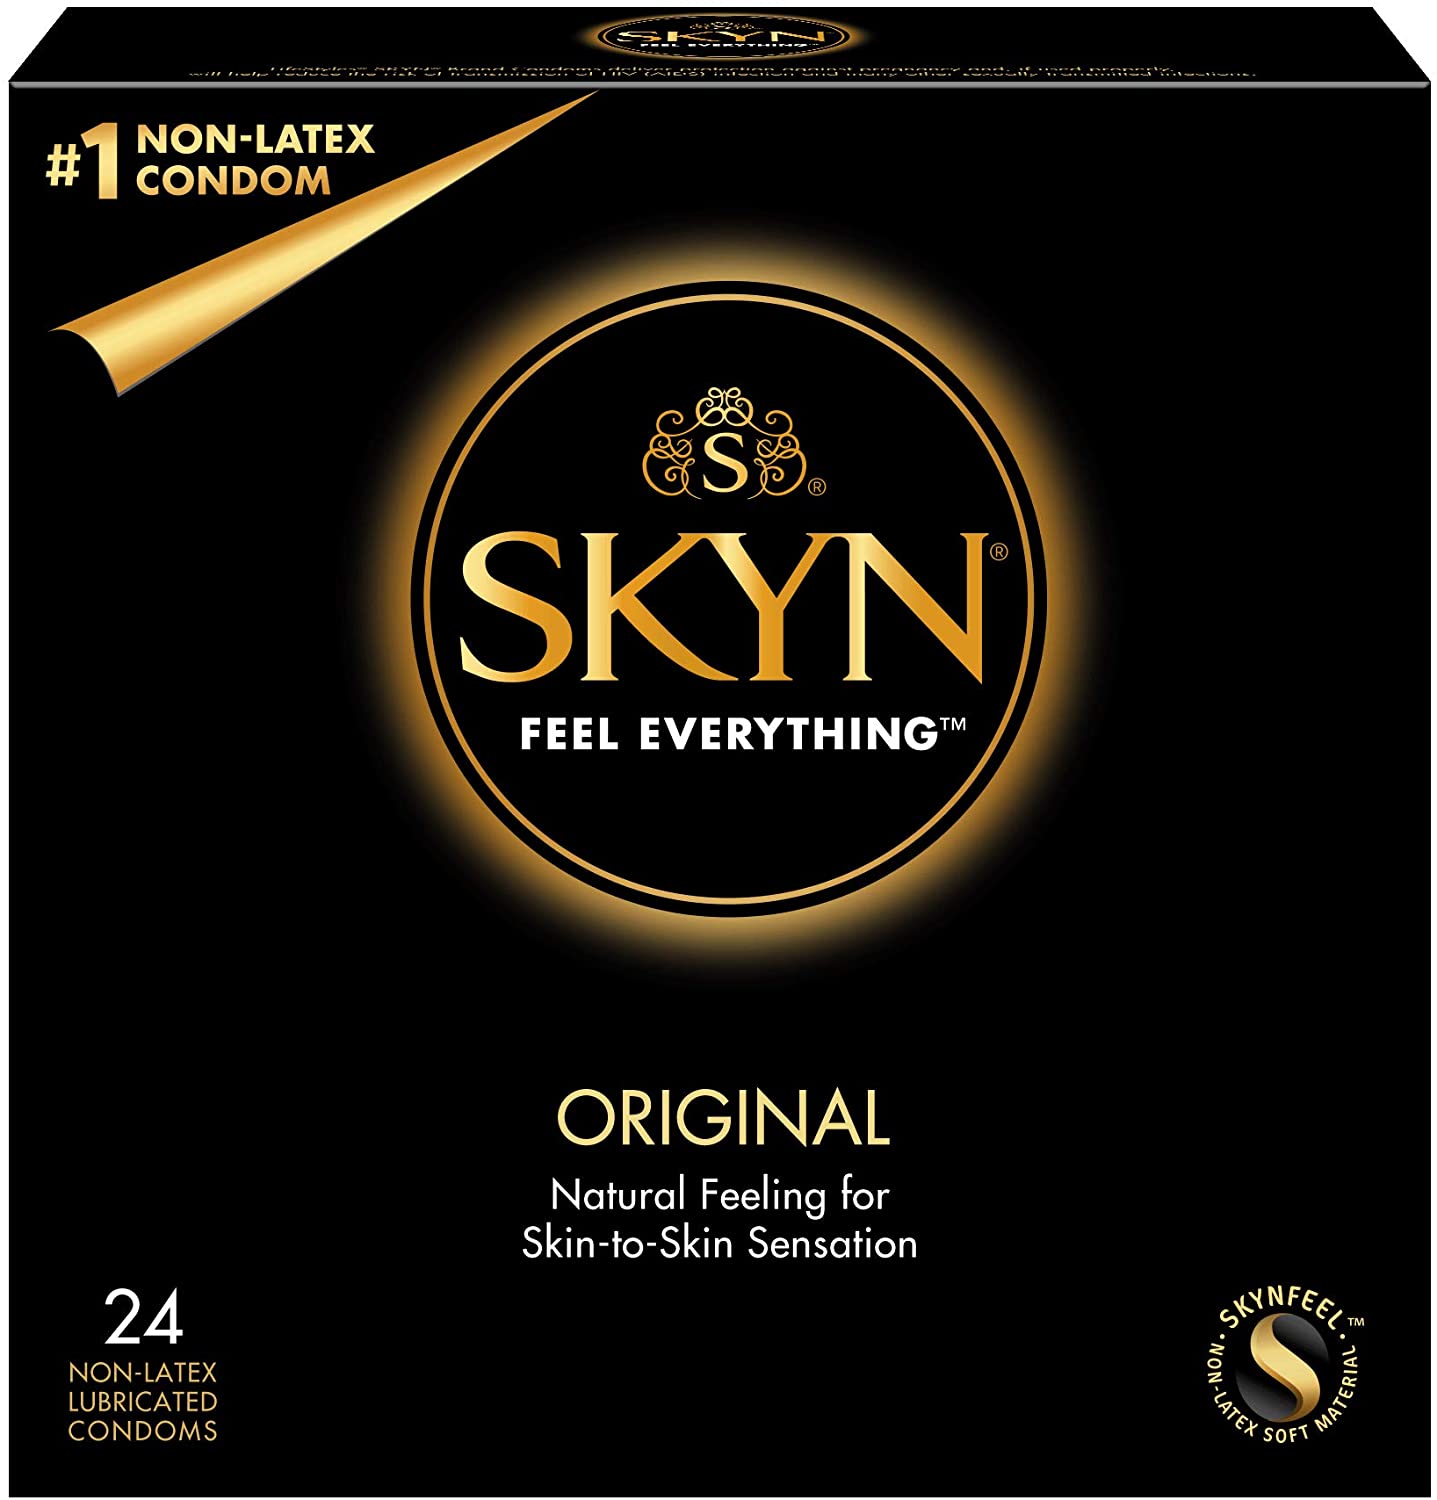 SKYN Original Non-Latex Condom 24ct - $4.95 after product coupon + EXTRA20 code